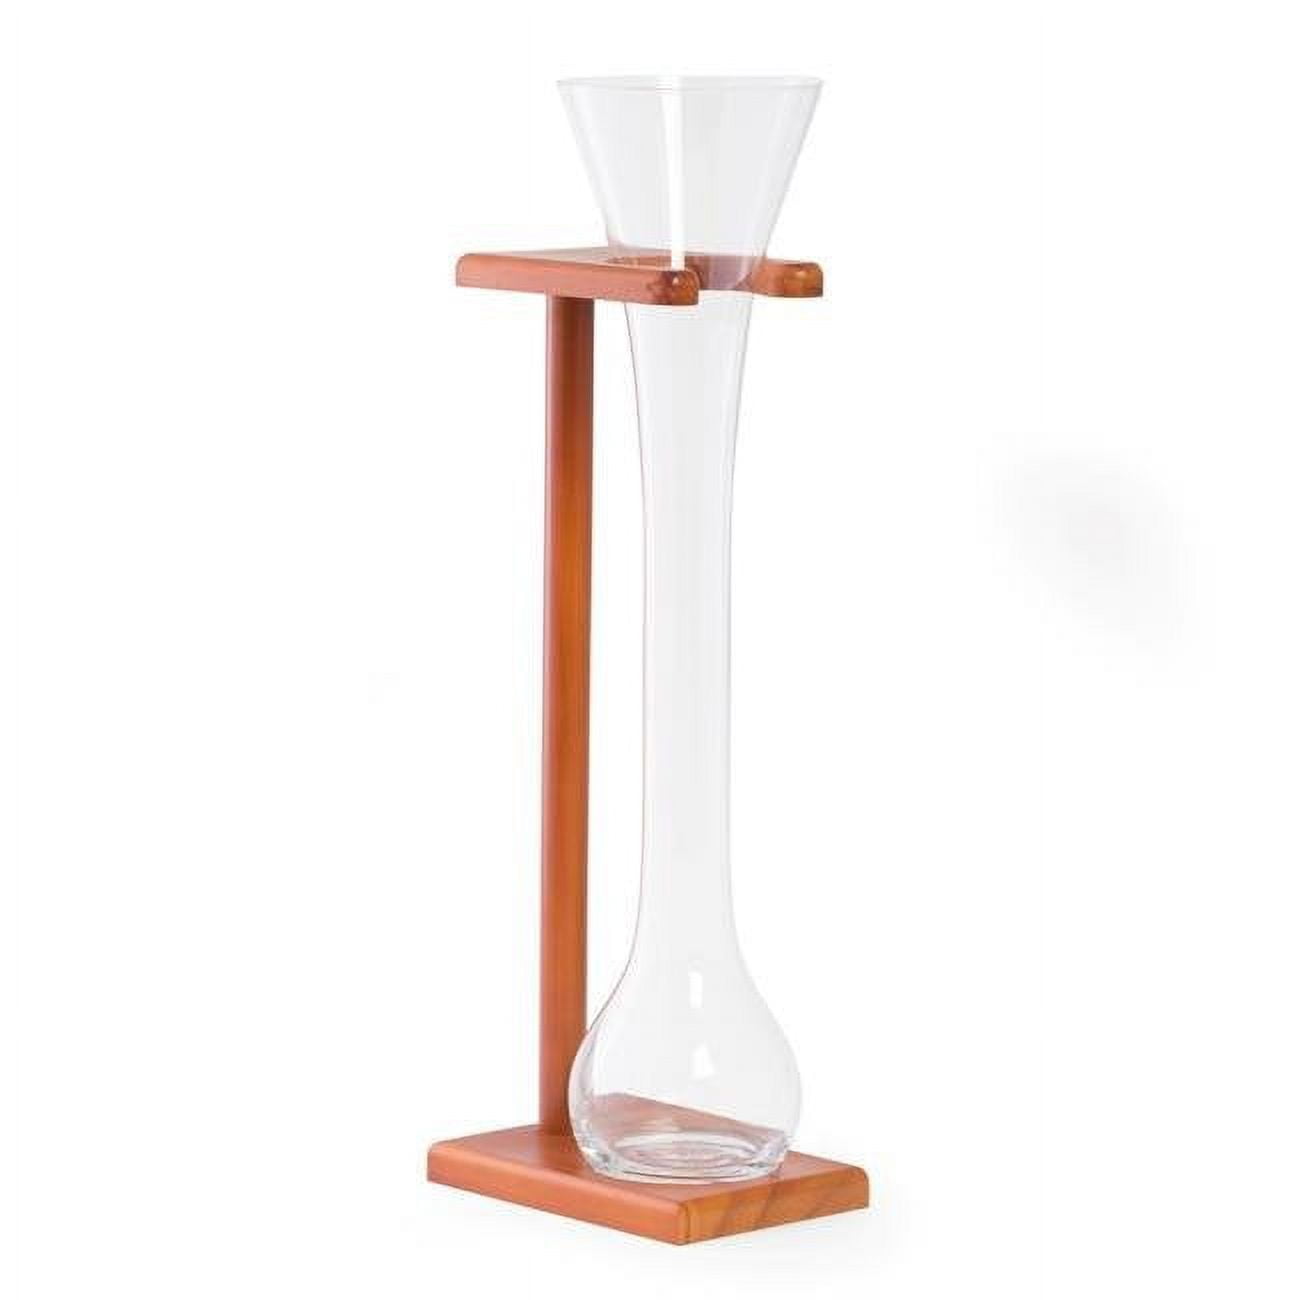 Picture of Bey-Berk International BS111M 24 oz Half Yard of Ale Glass with Wooden Stand - Brown